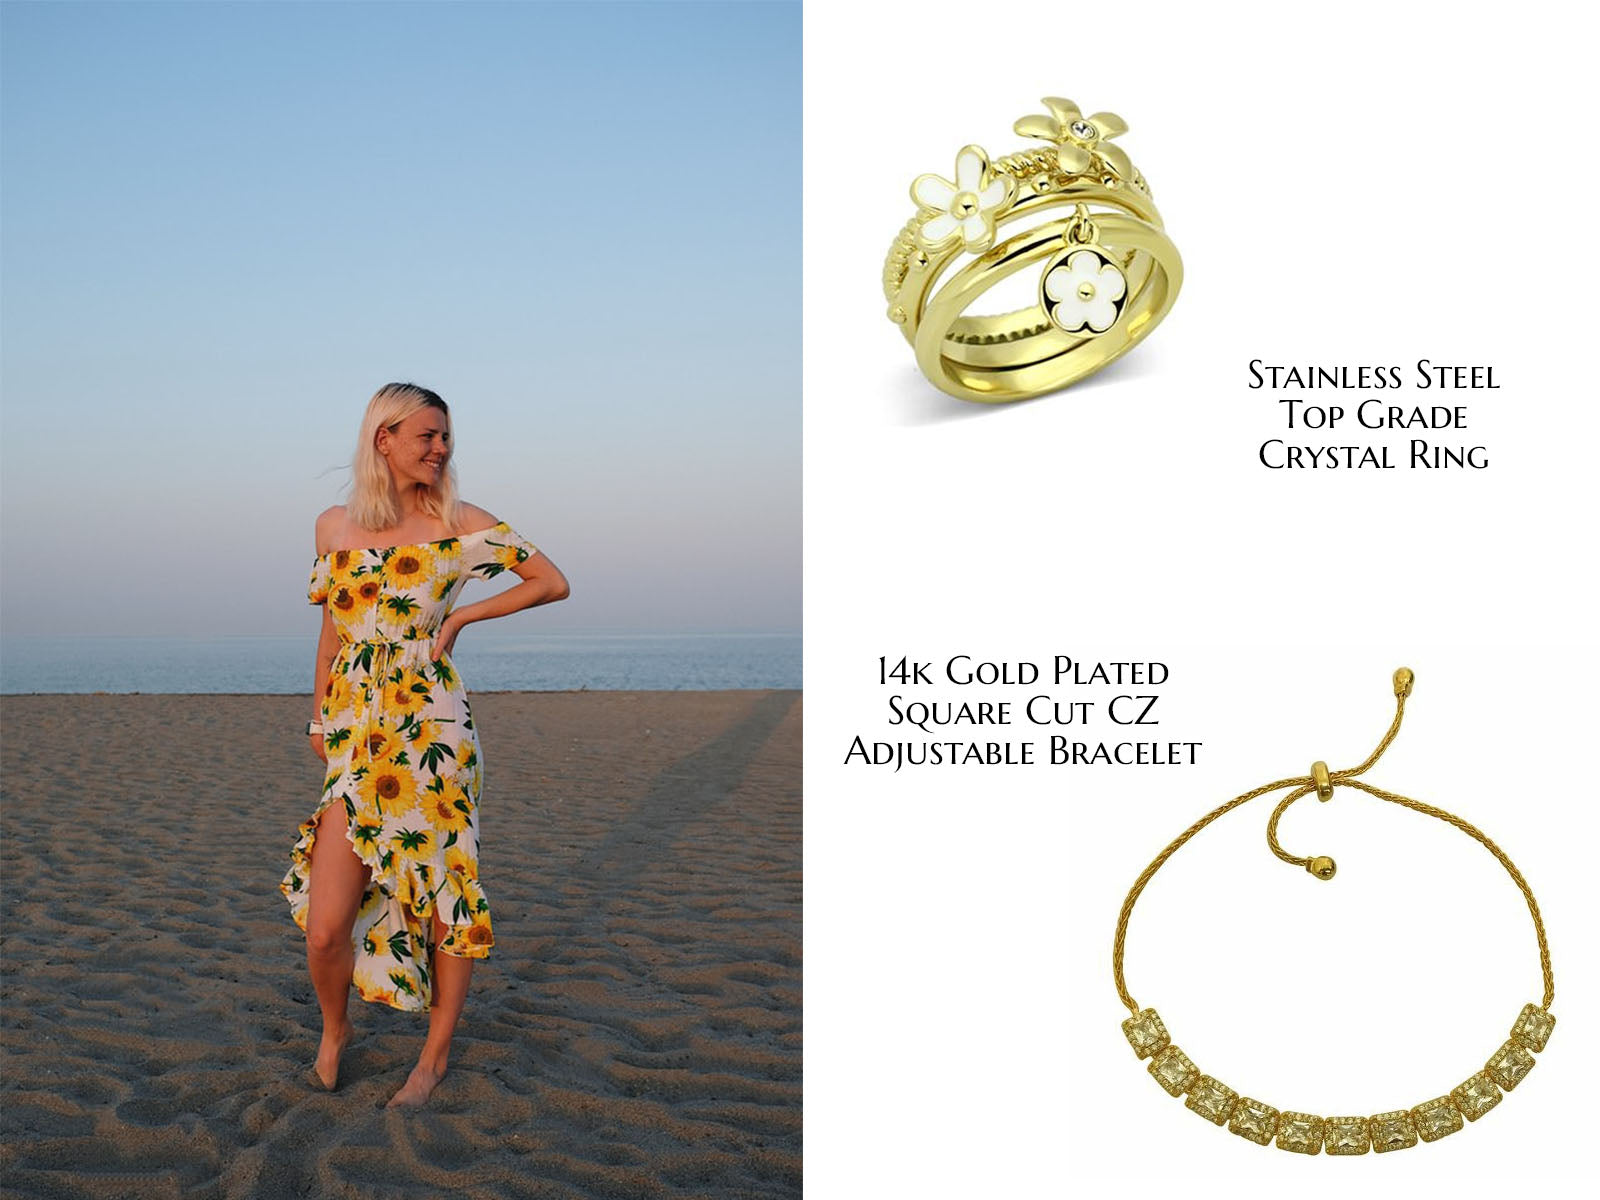 Woman in yellow floral dress on one side of the pic, and CeriJewelry Stainless Steel Top Grade Crystal Ring and 14k Gold Plated Square Cut CZ Adjustable Bracelet on the other side